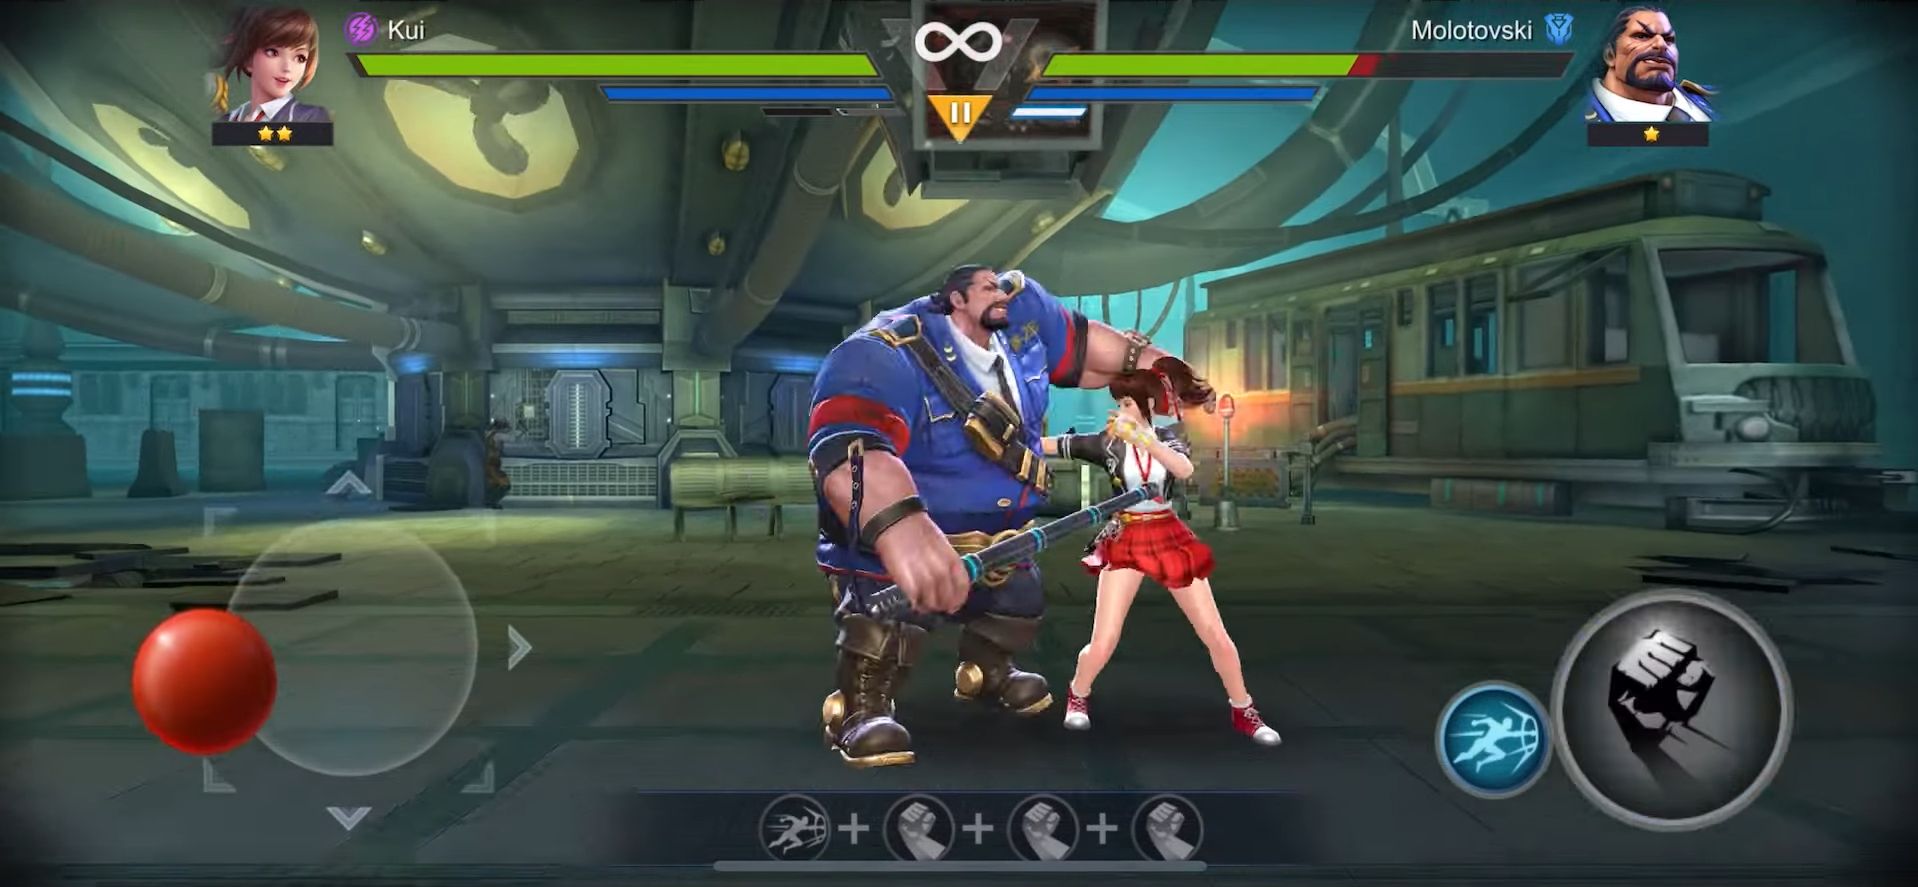 Final Fighter: Fighting Game - Android game screenshots.